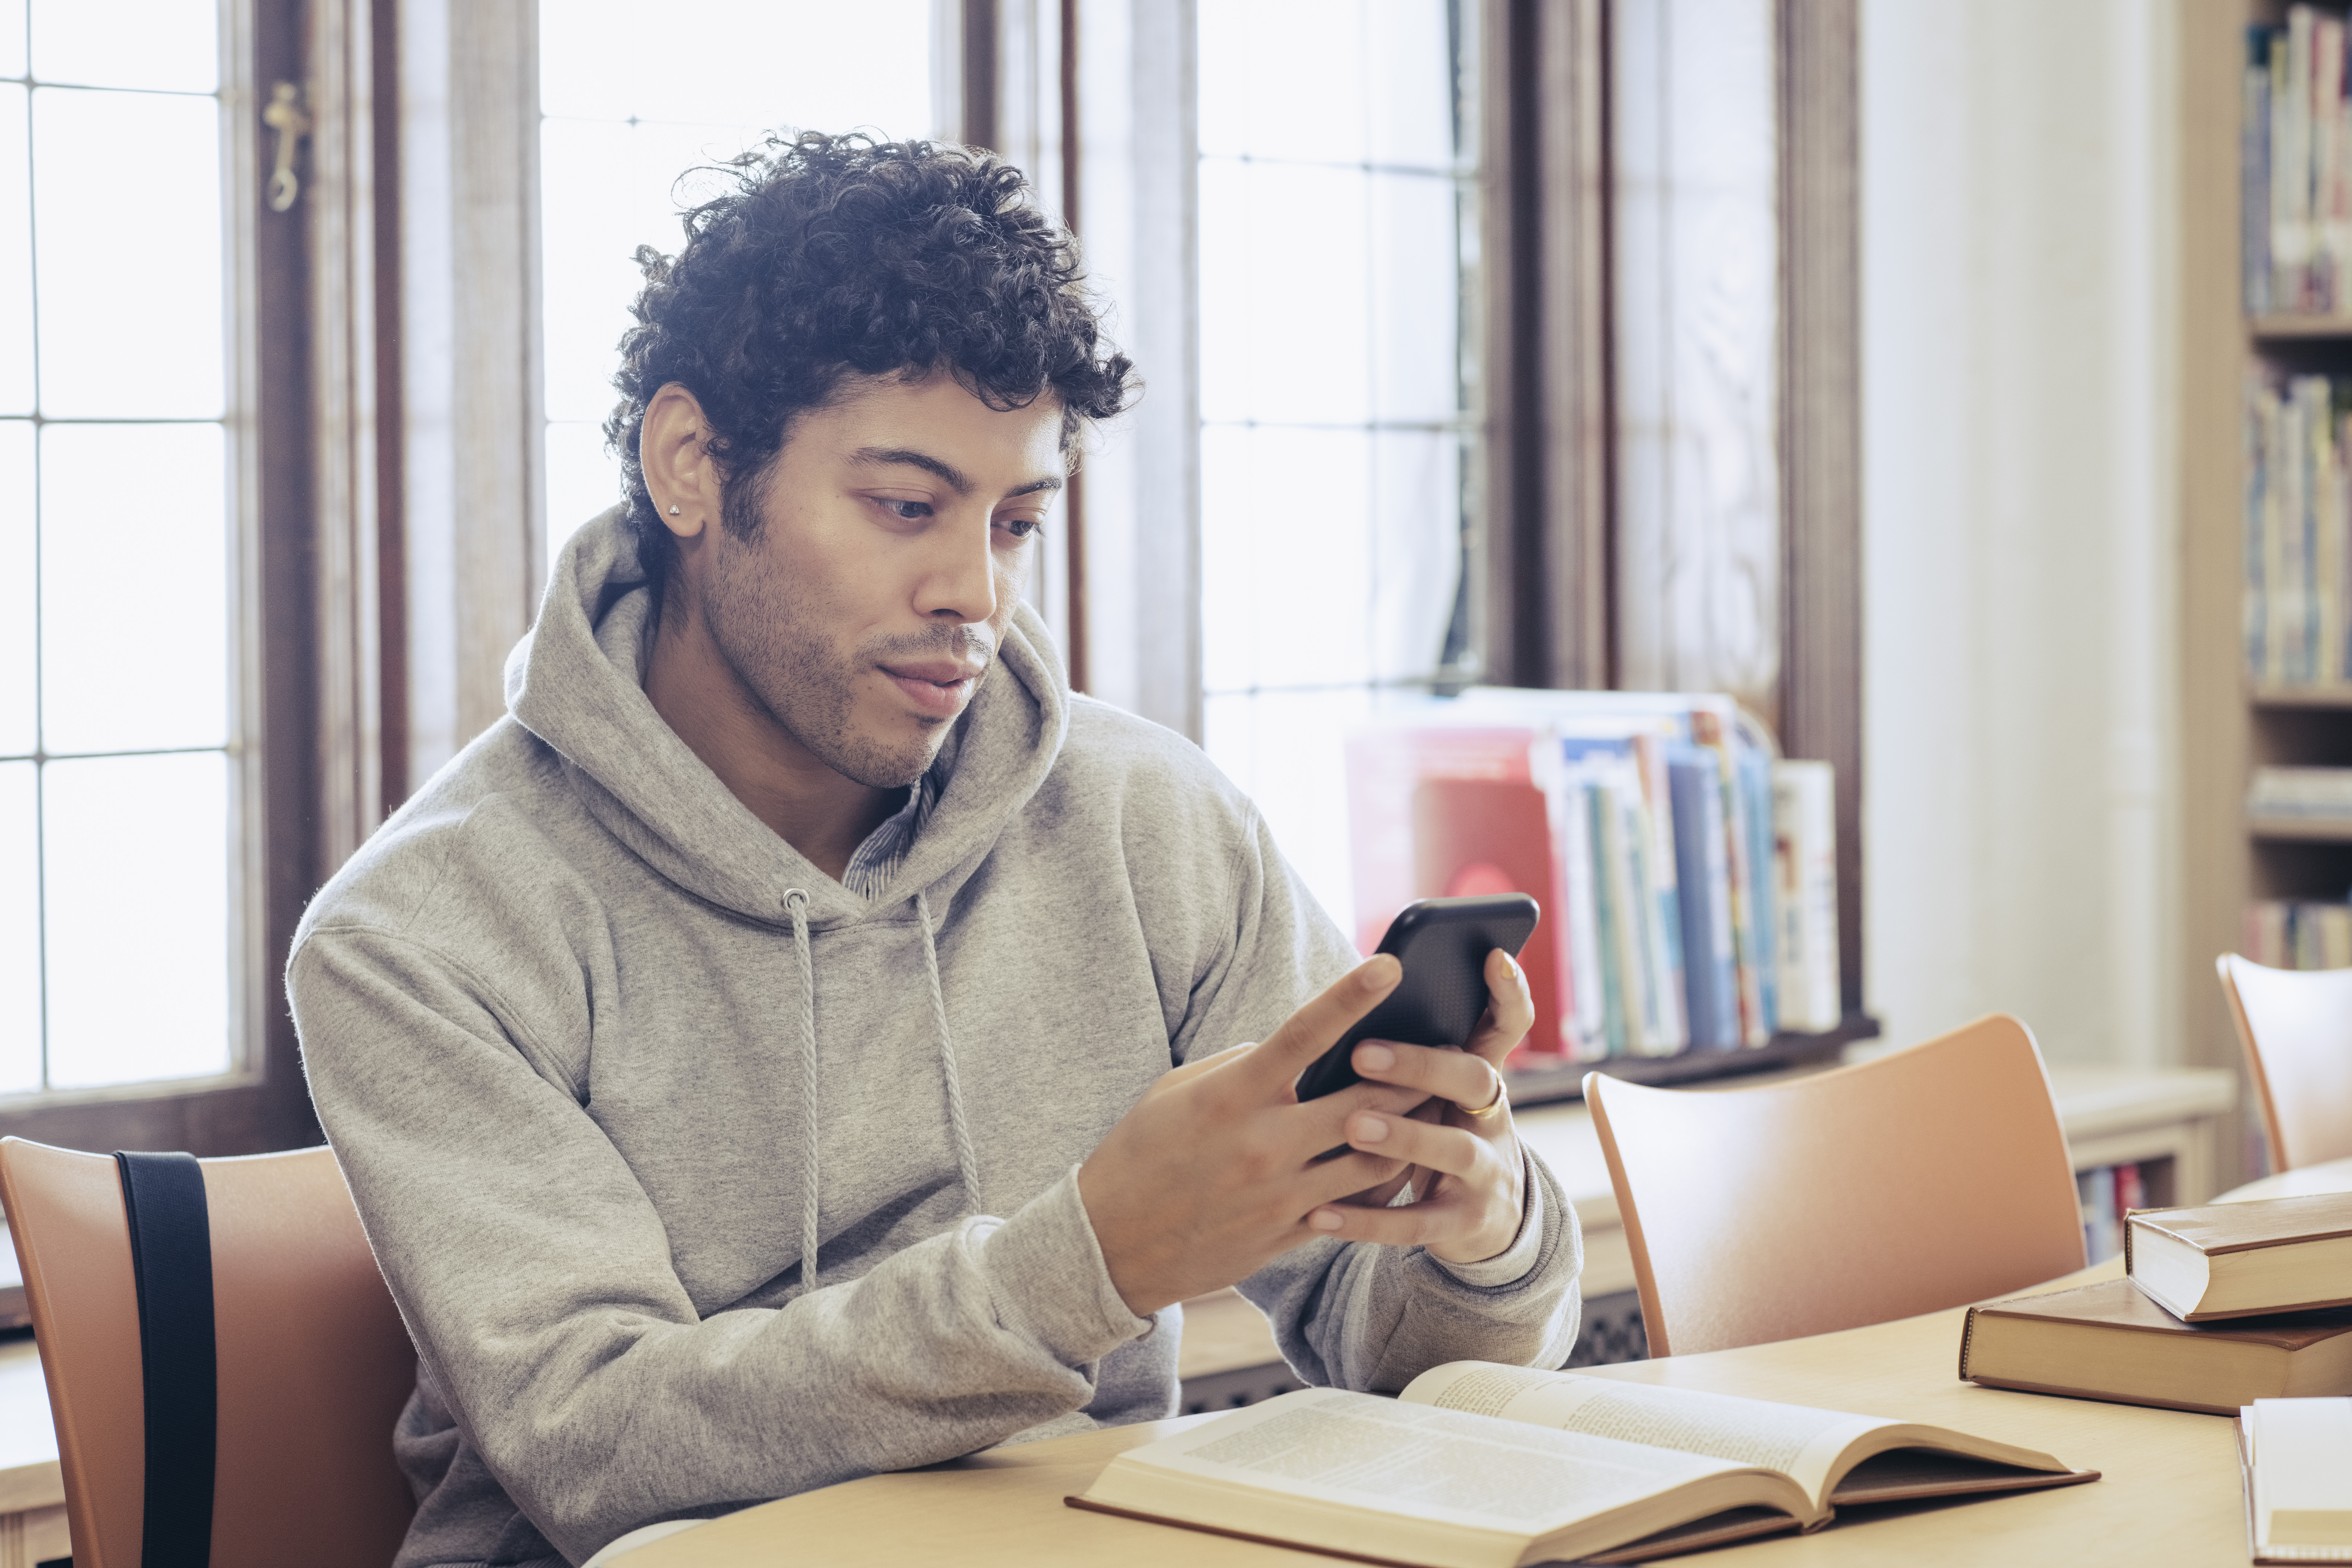 Young man looking at smart phone while studying in library